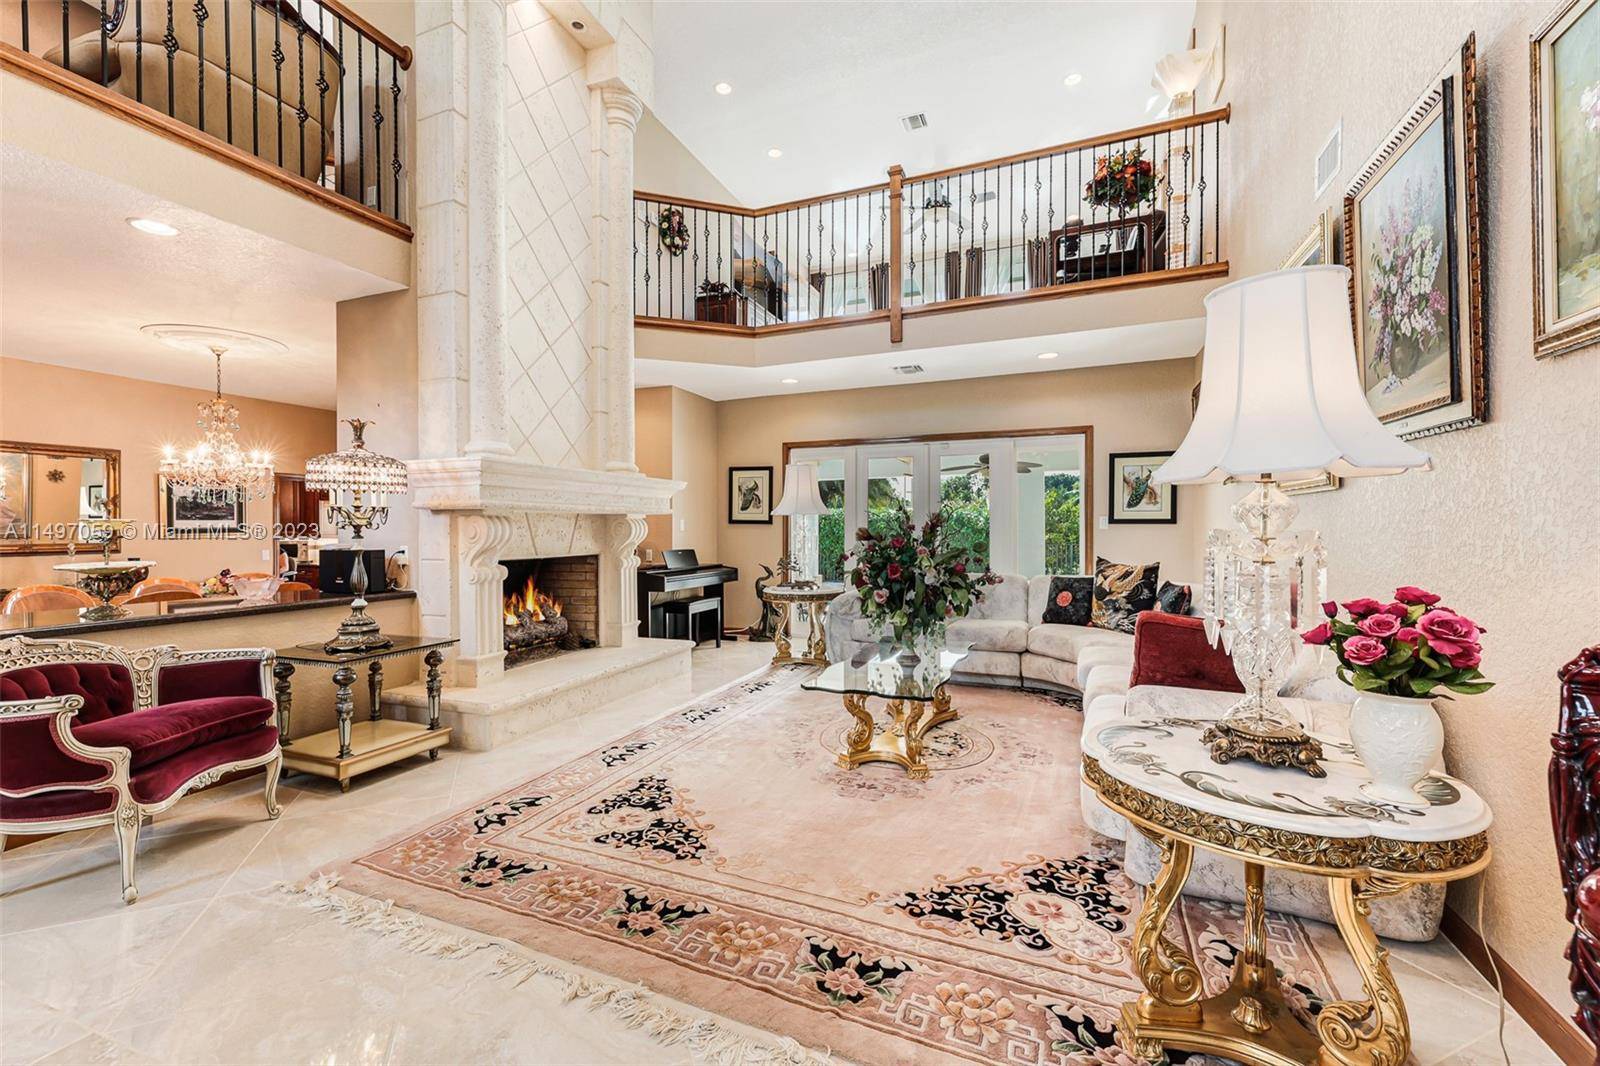 Luxury, Elegance is the lifestyle that comes with this home on a private lot on the cul de sac.